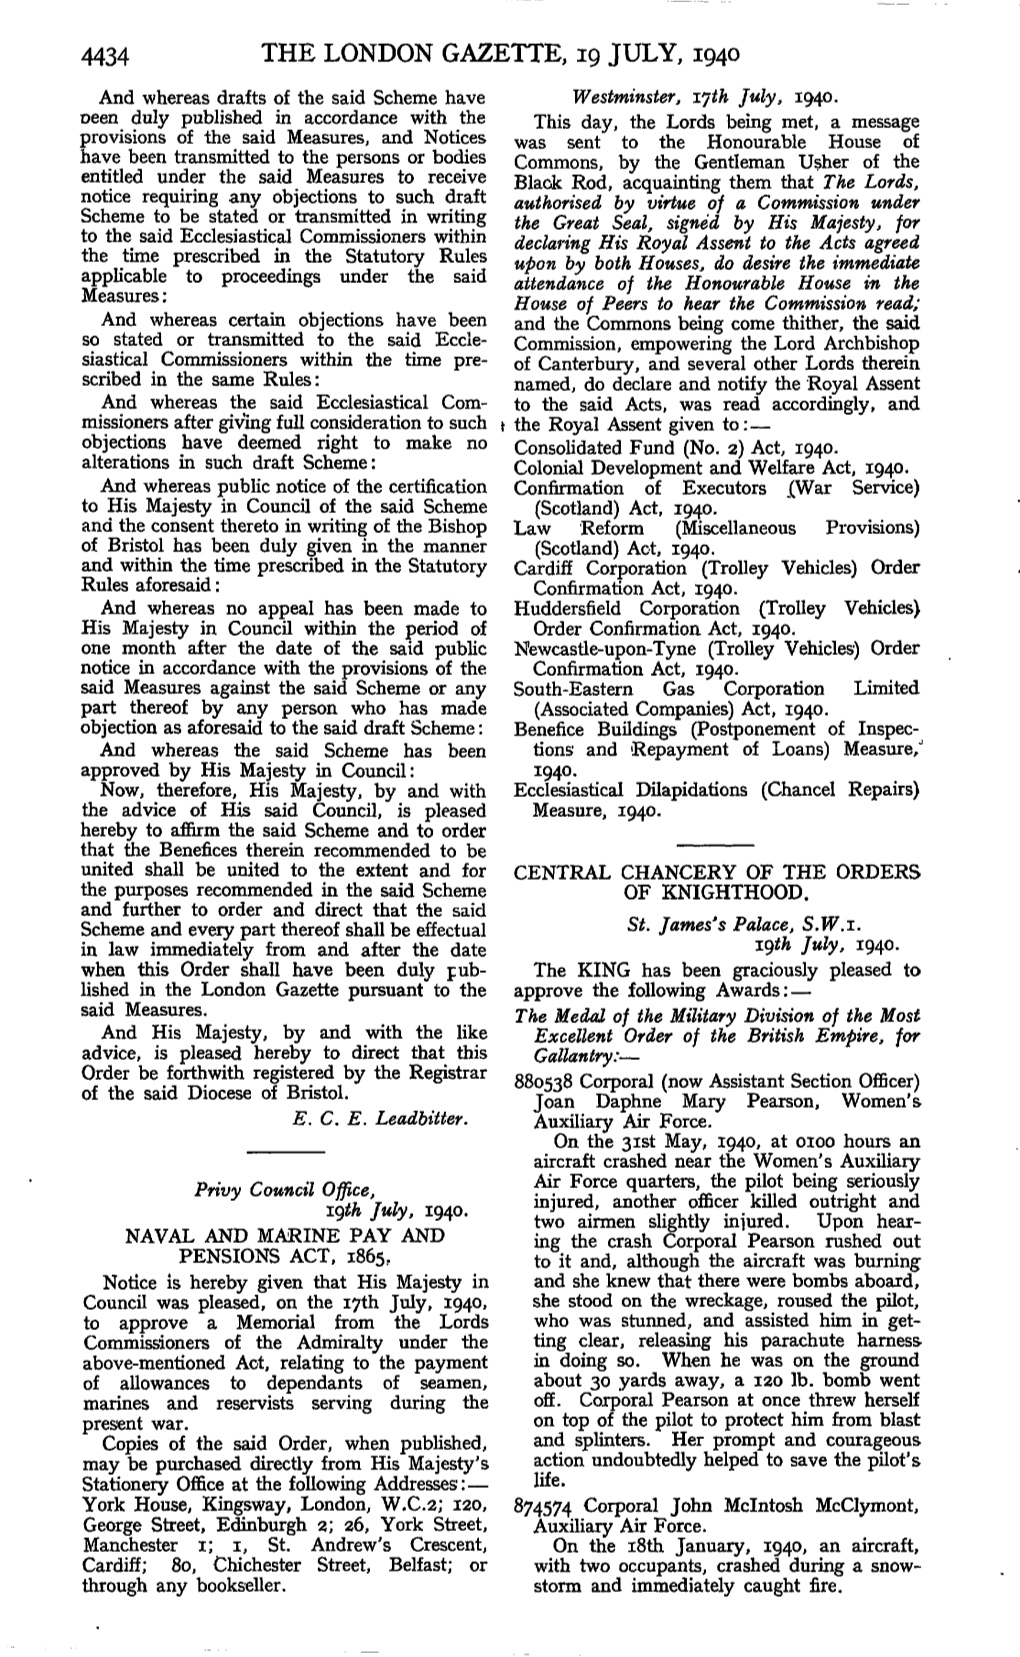 THE LONDON GAZETTE, 19 JULY, 1940 and Whereas Drafts of the Said Scheme Have Westminster, Ijth July, 1940